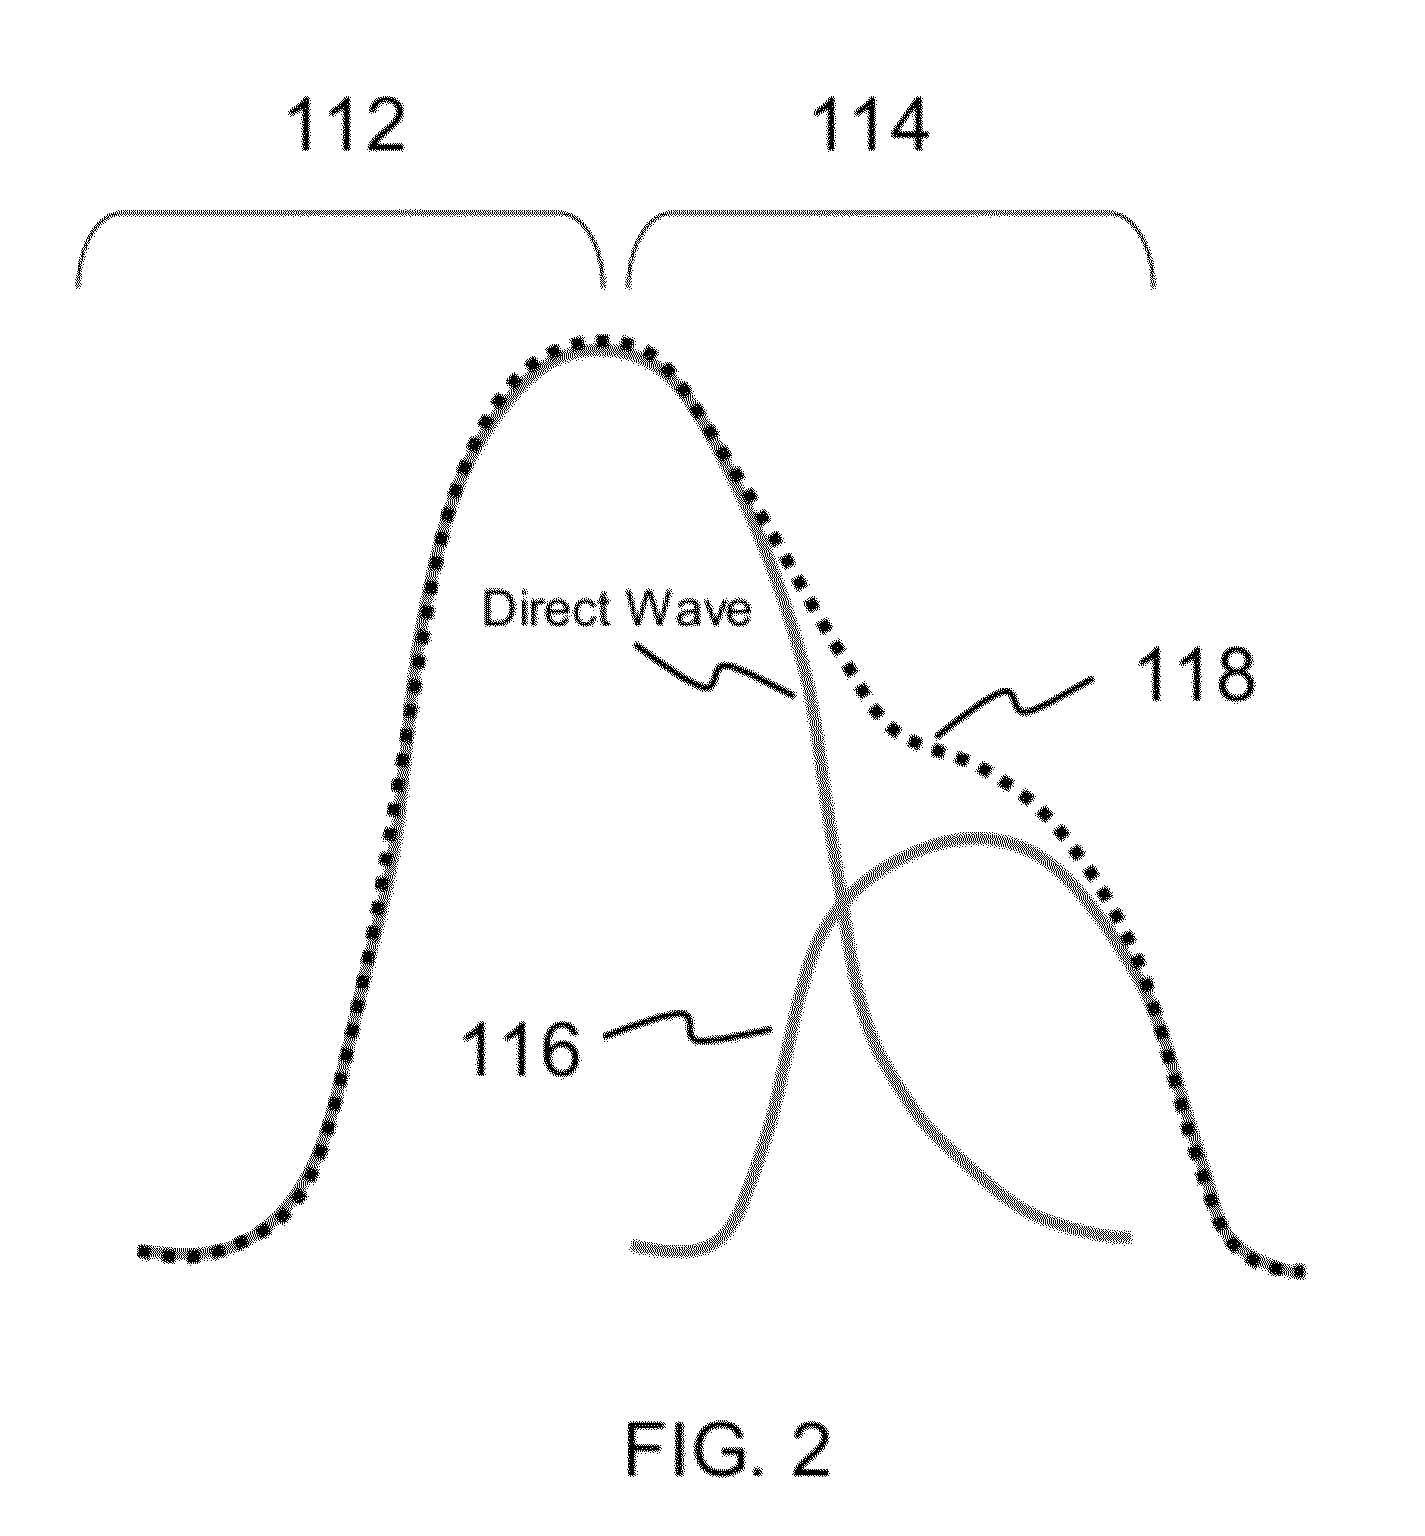 Devices and methods for non-invasive optical physiological measurements